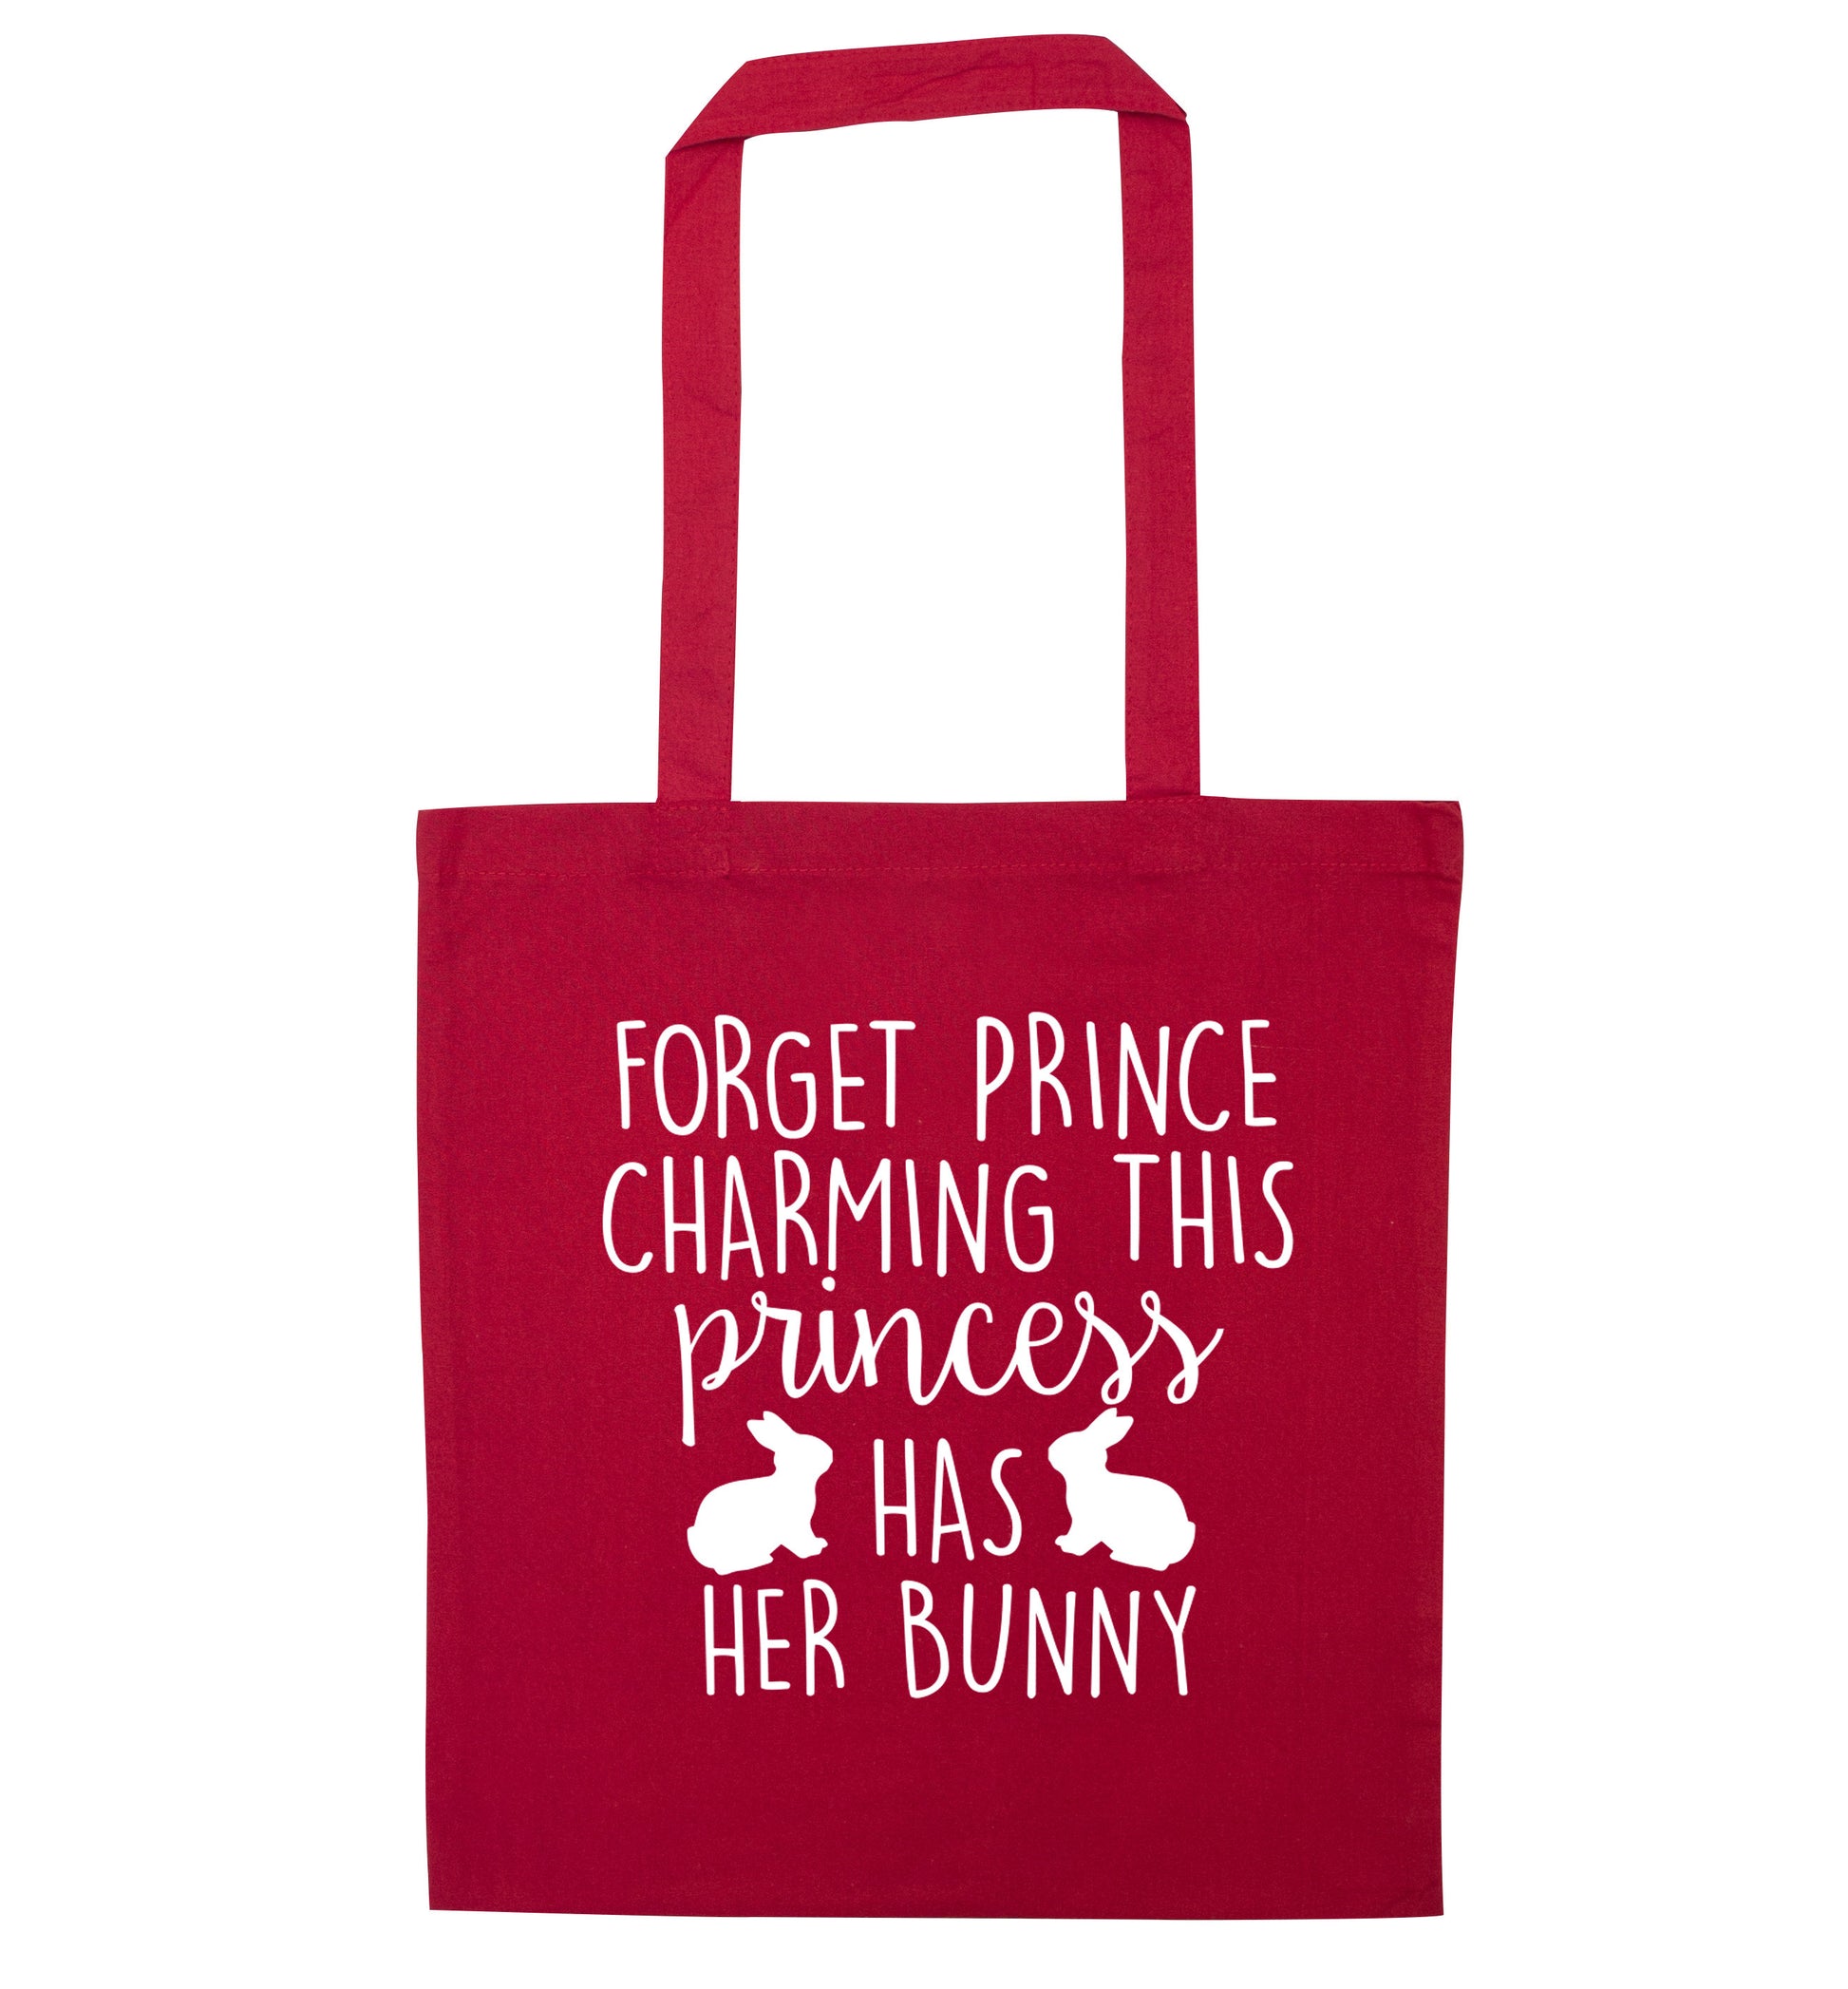 Forget prince charming this princess has her bunny red tote bag